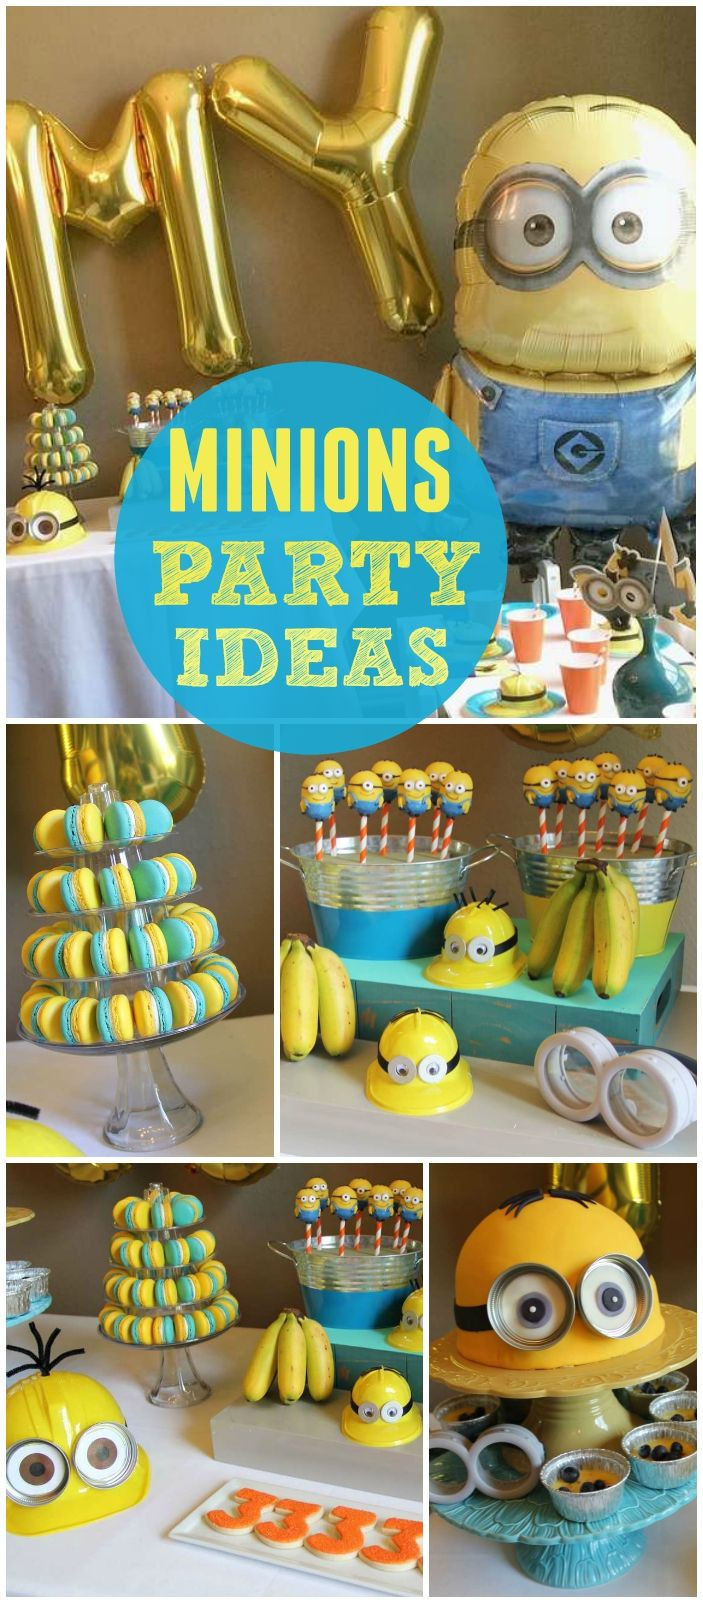 Despicable Me Birthday Party Supplies
 1150 best images about Despicable Me Birthday Party Ideas